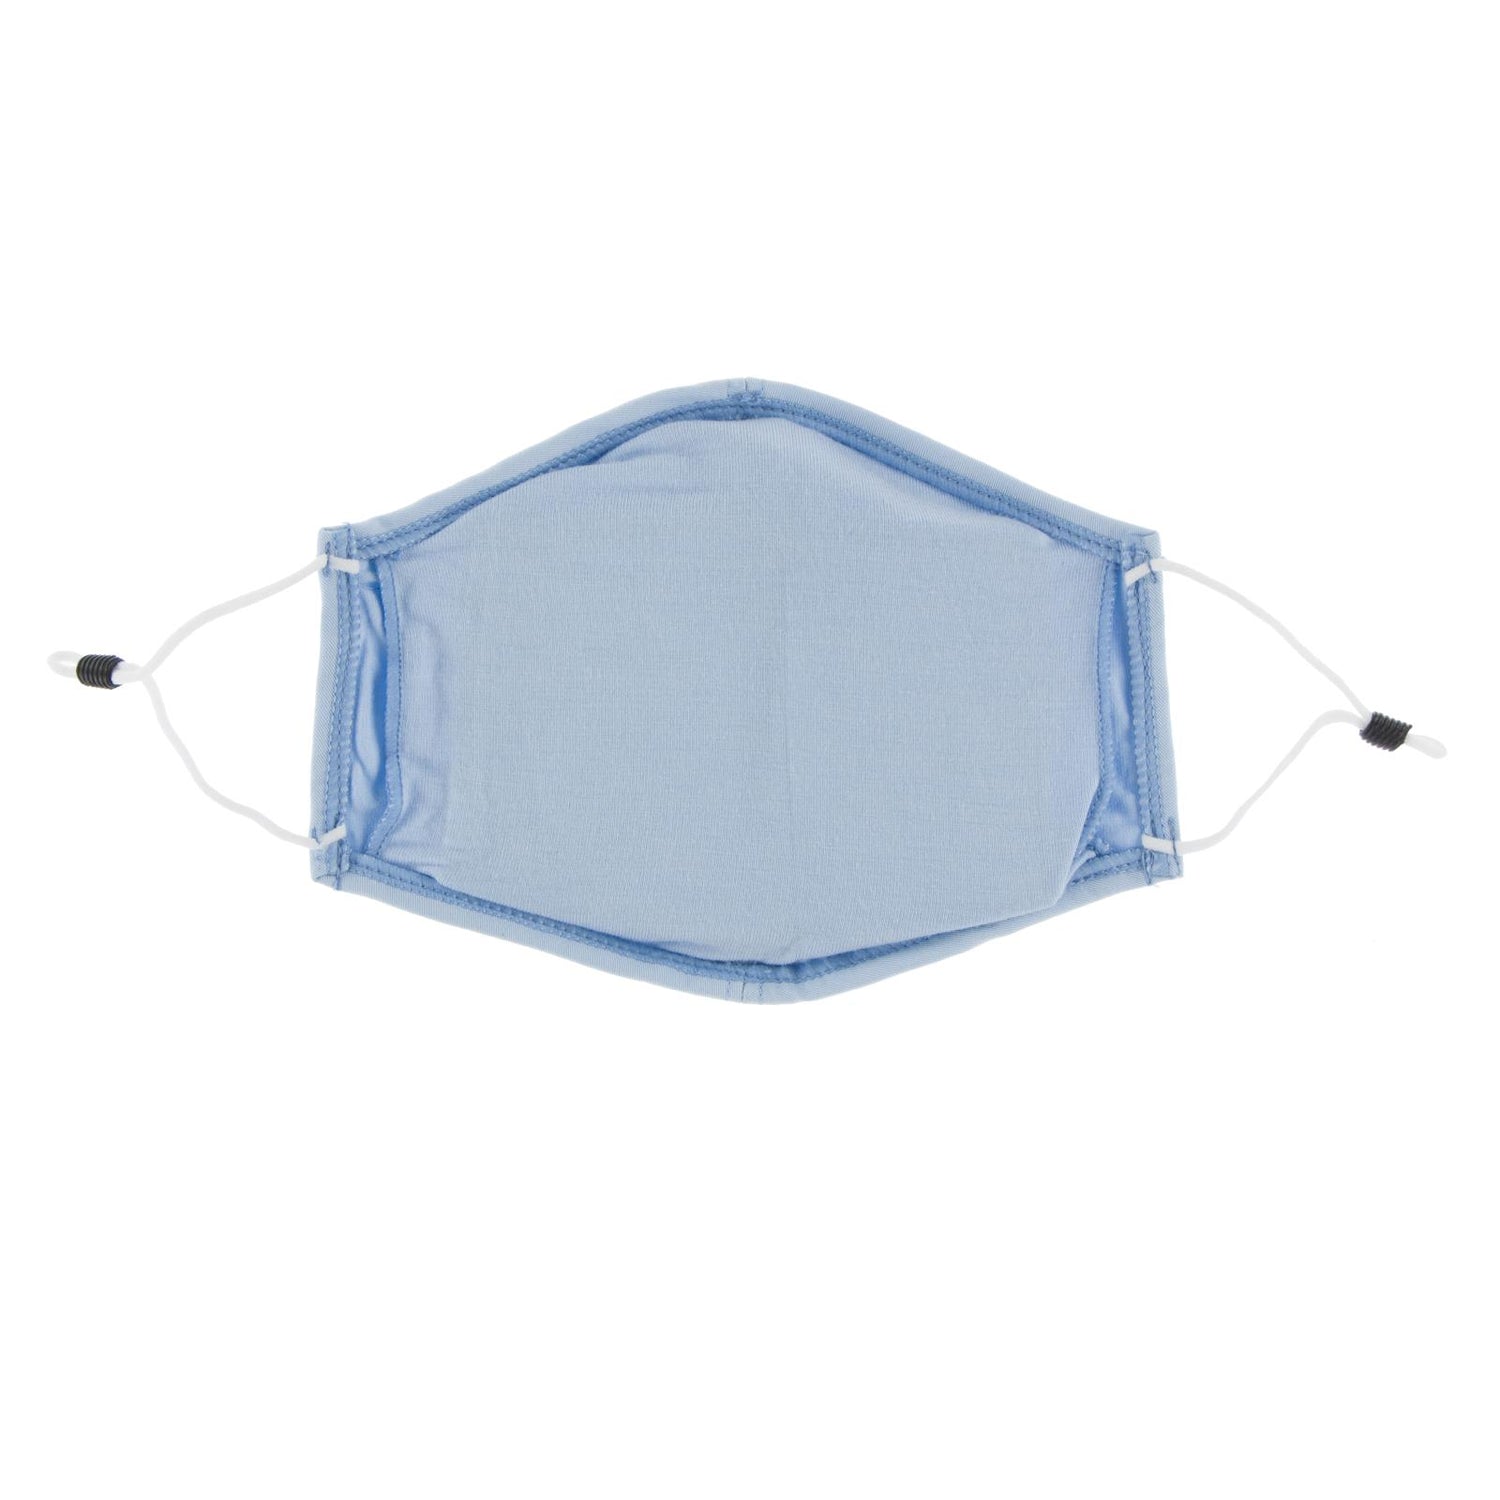 Waterproof Mask with Covered Vent and Filter for Adults in Pond